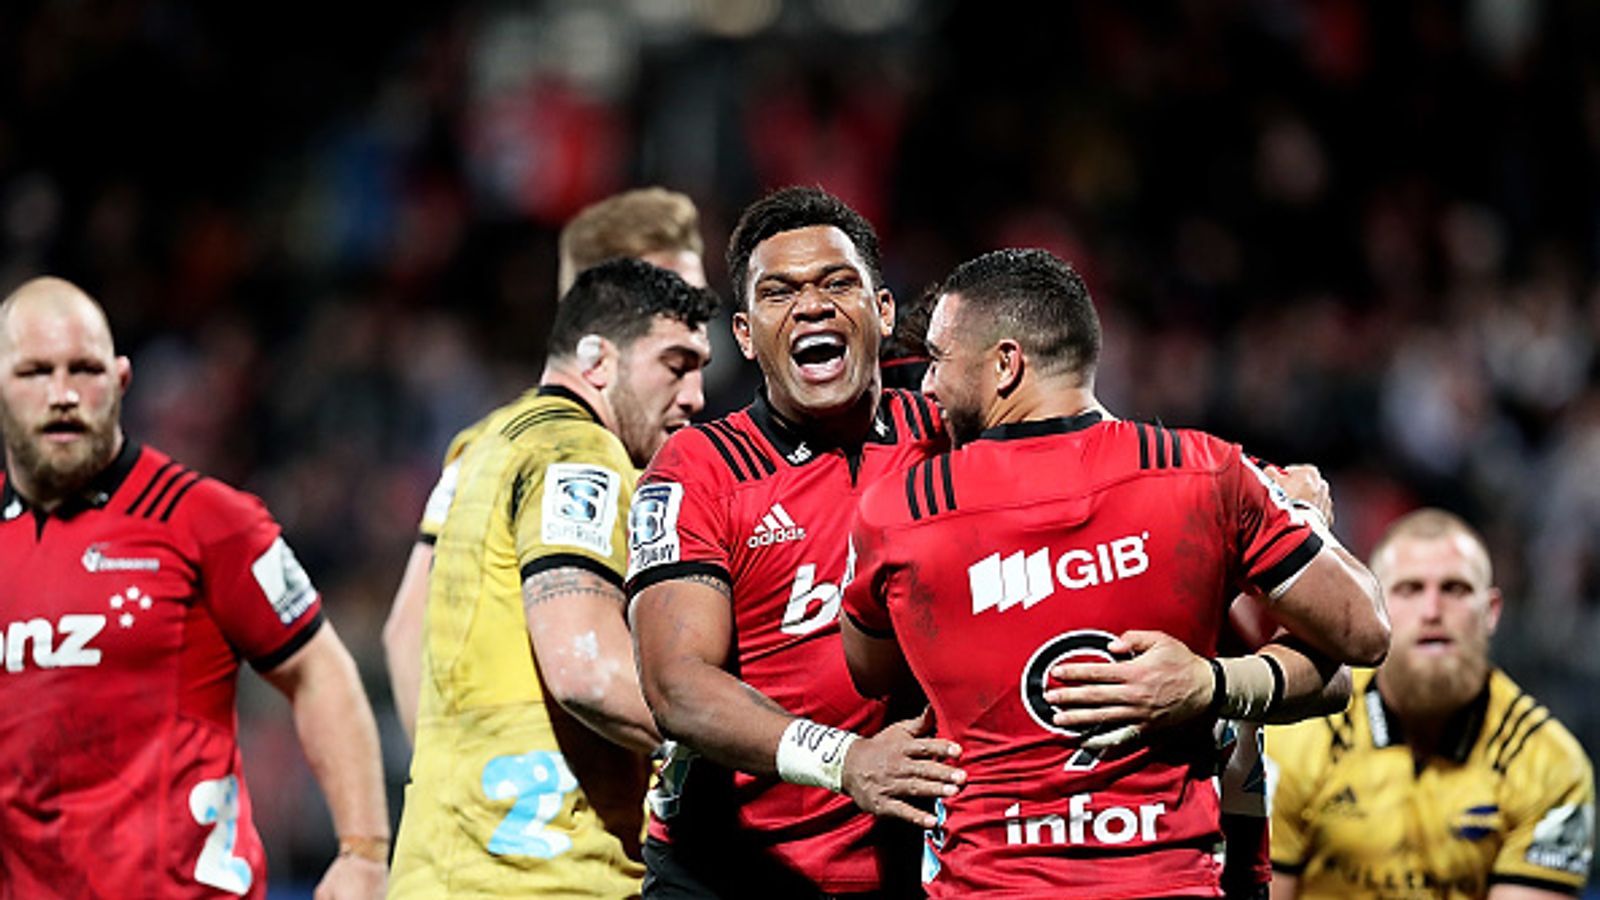 Crusaders 3012 Hurricanes Super Rugby champions clinch final spot